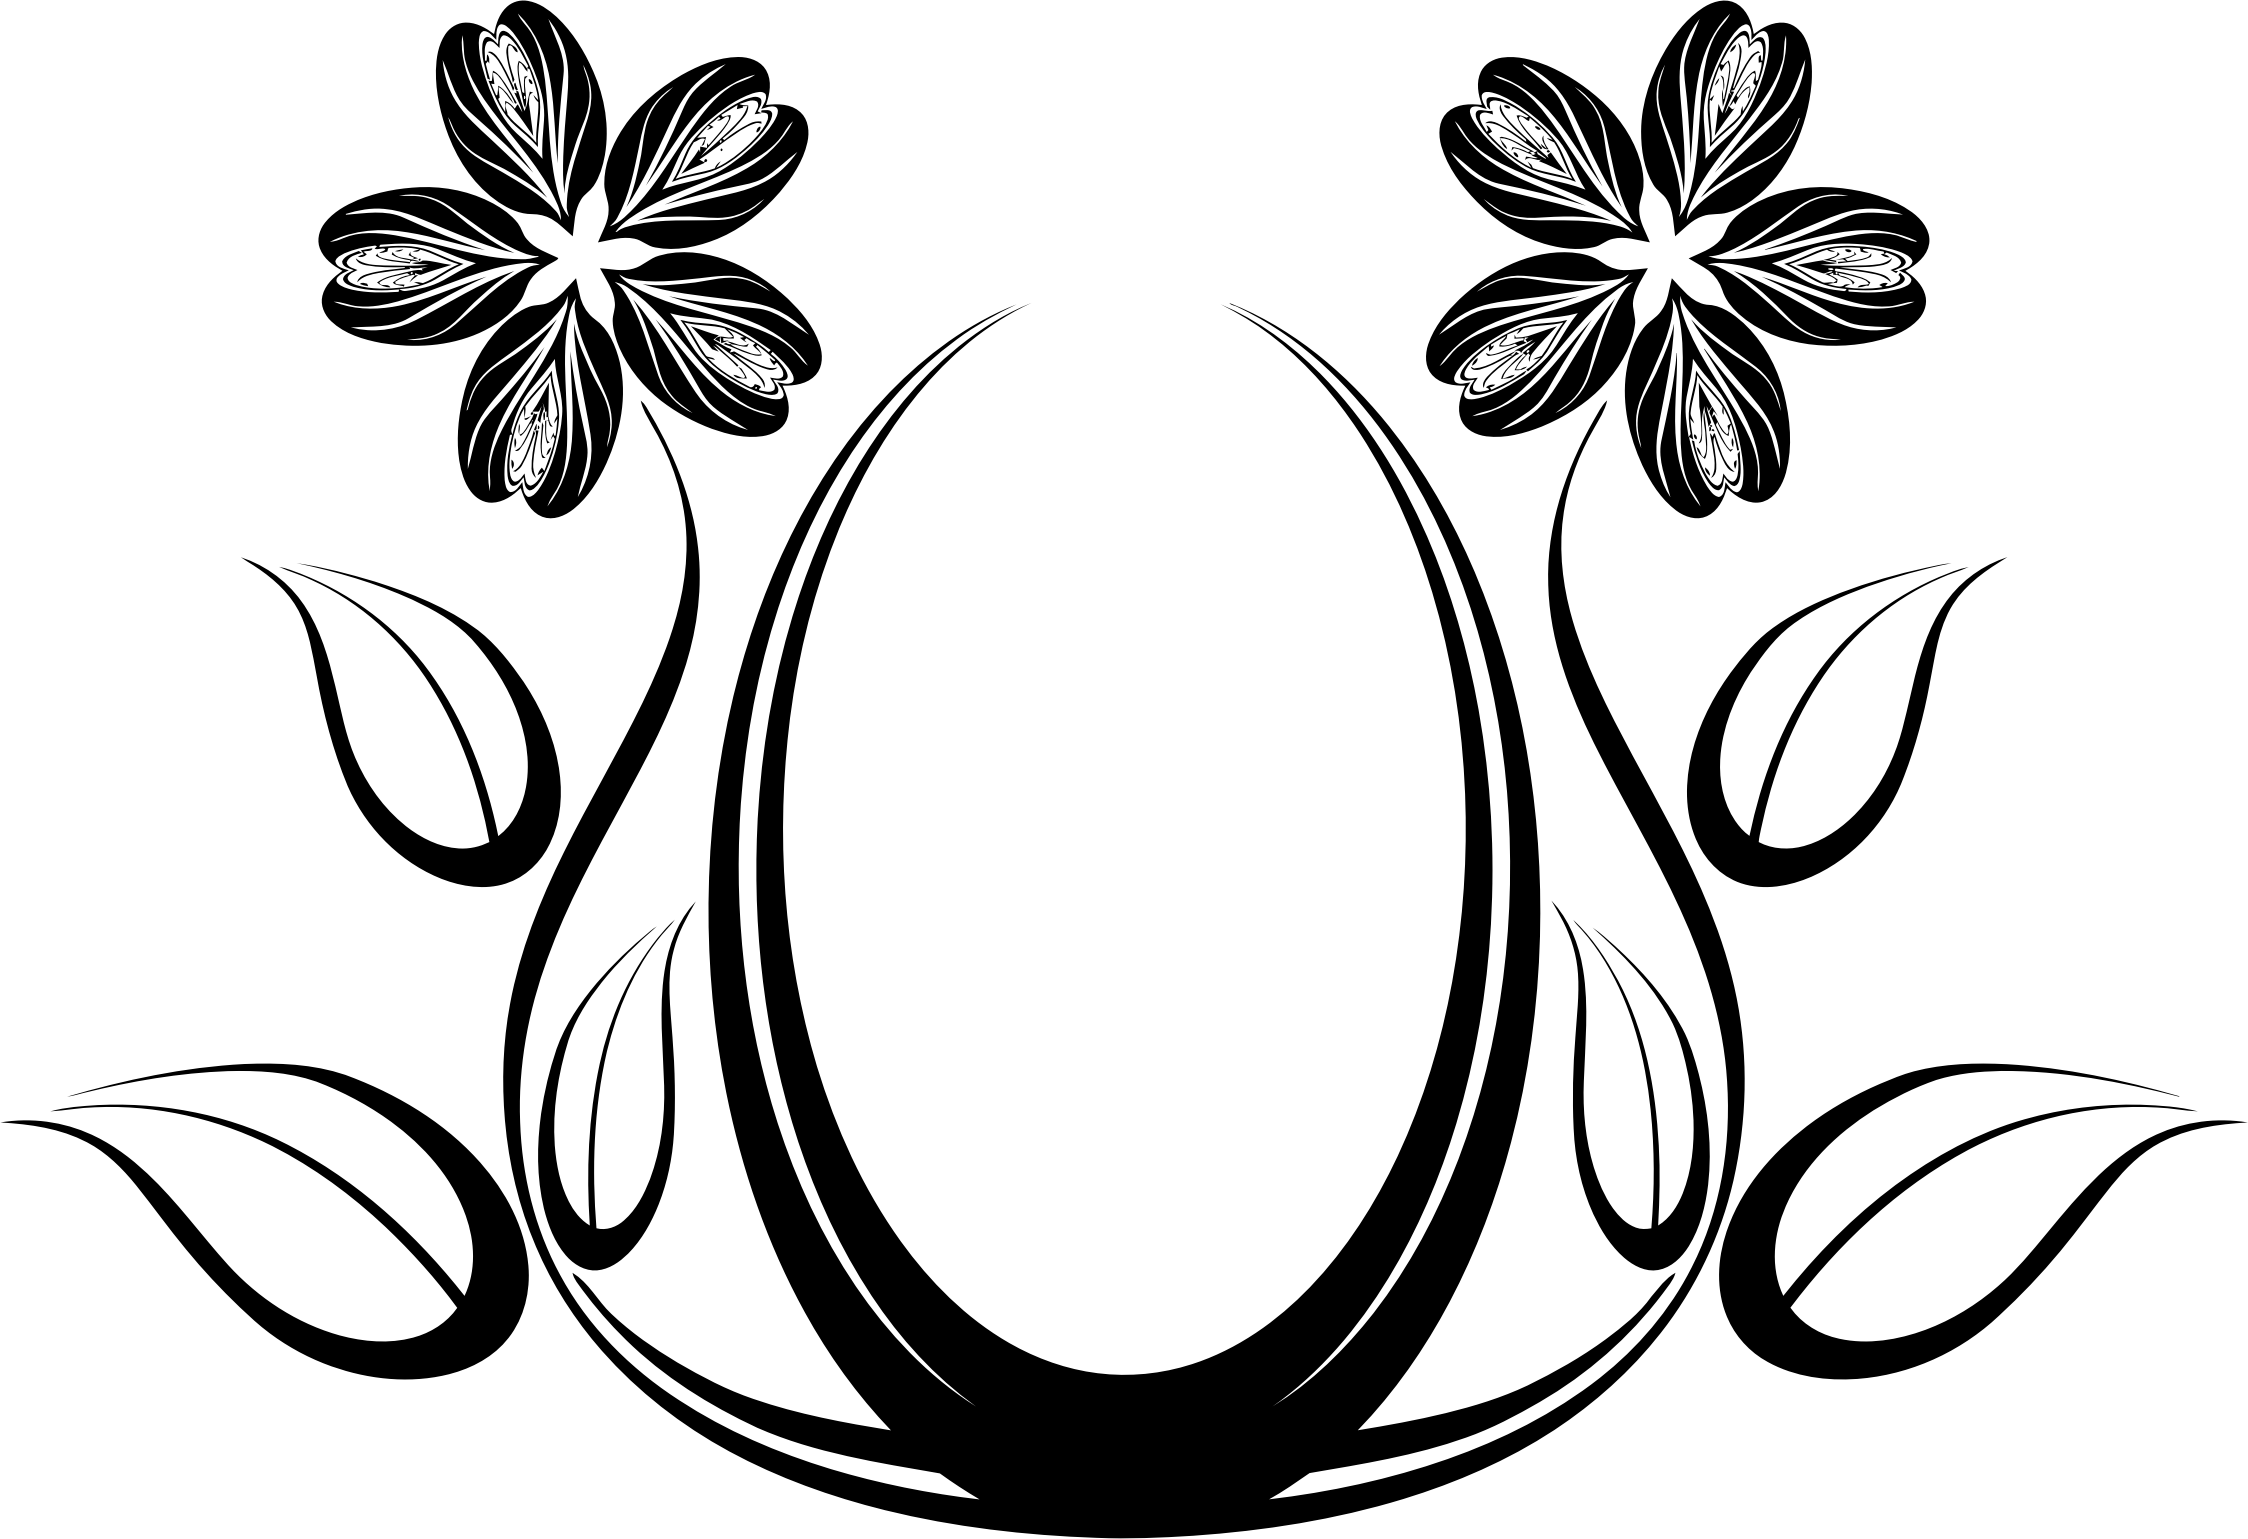 Silhouette designs at getdrawings. Clipart flower design